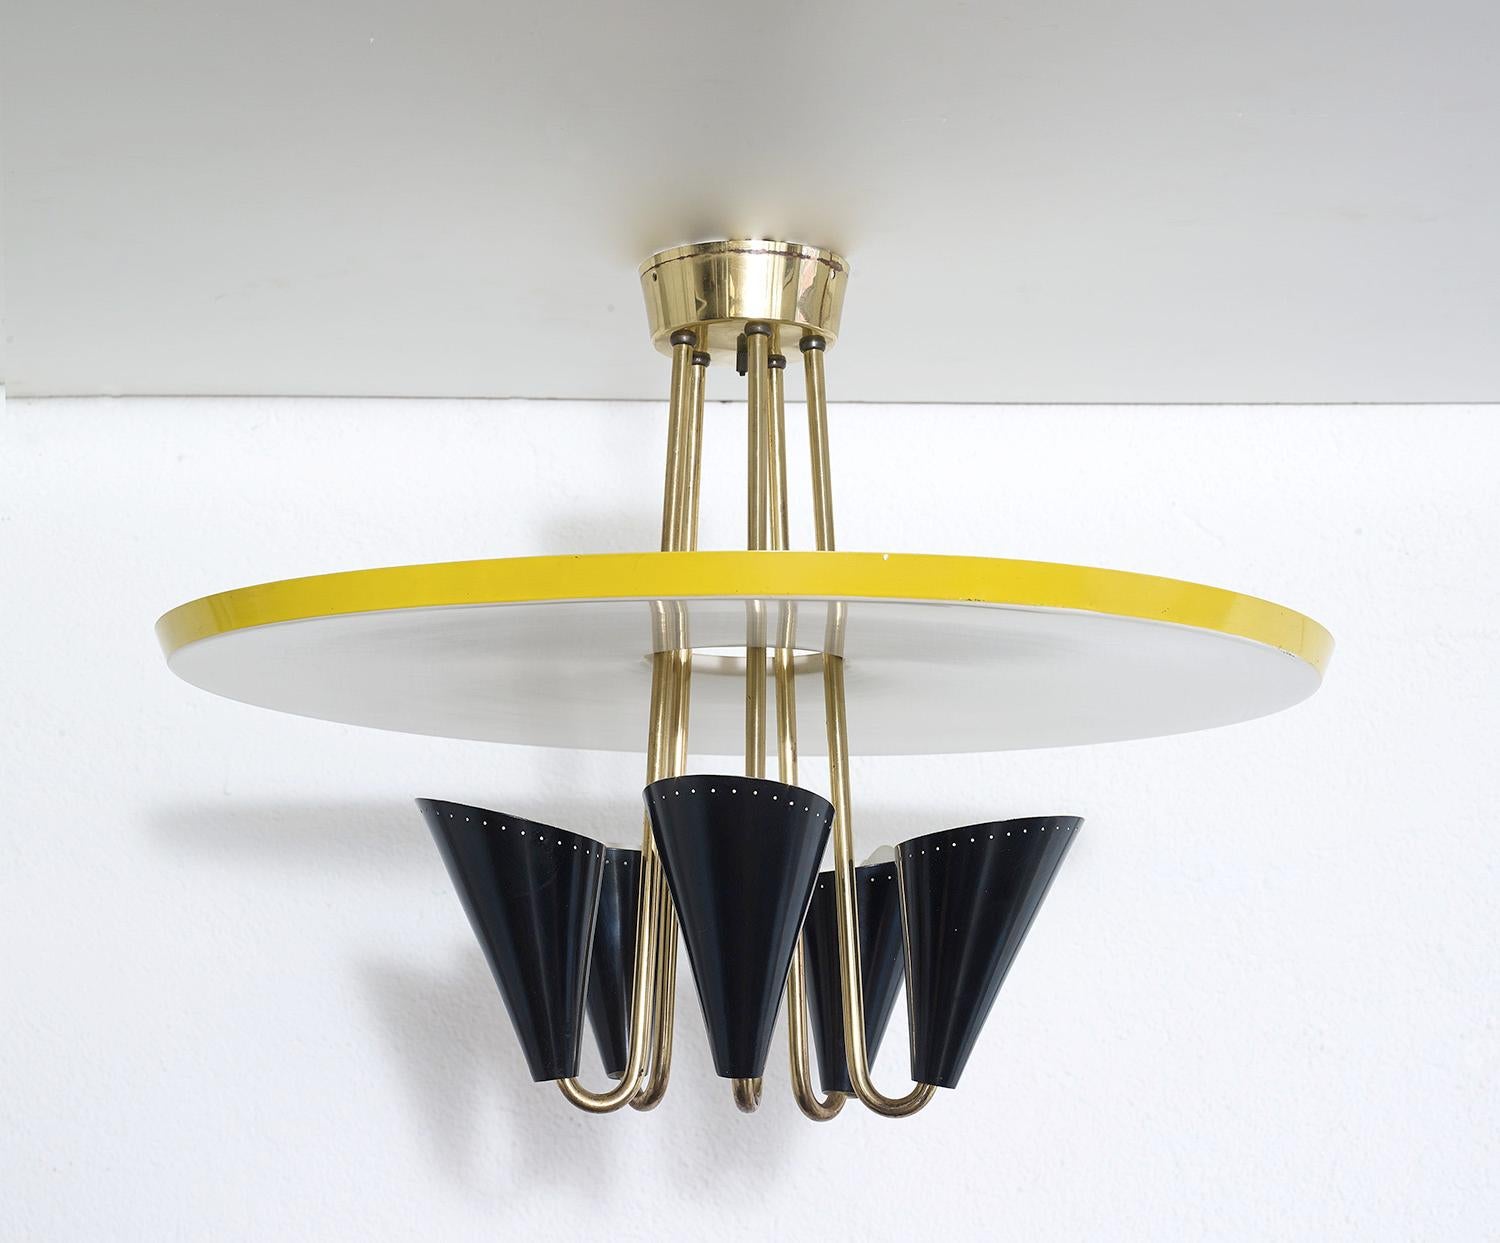 Enameled Ceiling Light in Lacquered Metal and Brass, BAG Turgi, Switzerland, 1950